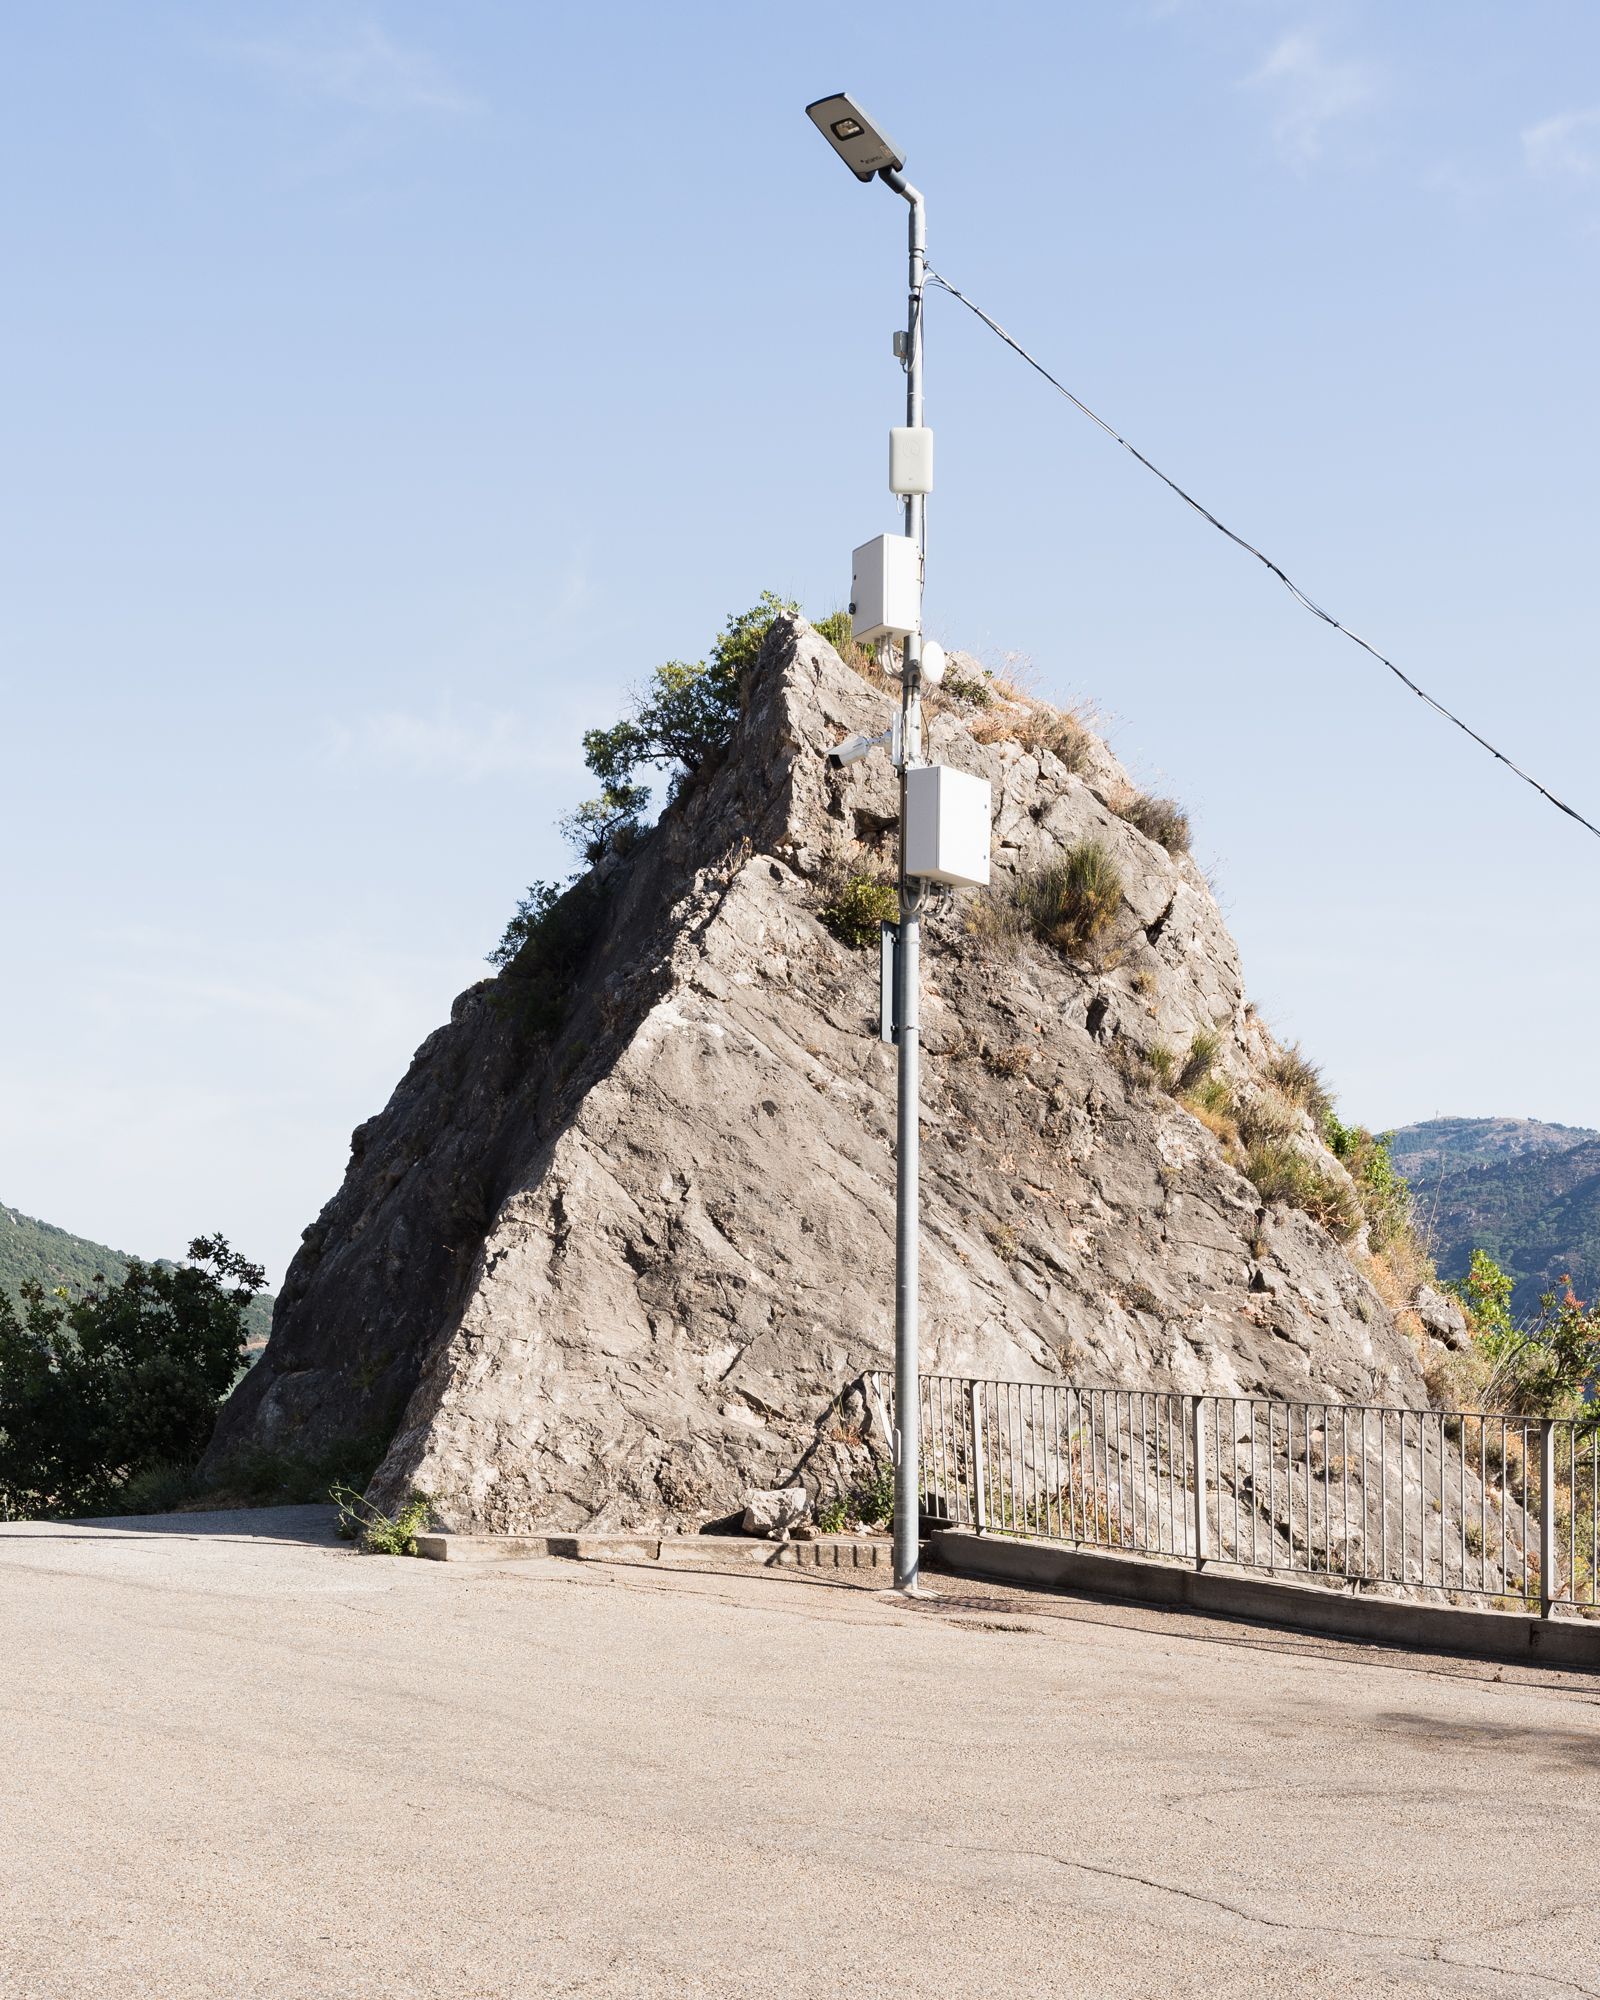 © Guglielmo Cherchi - Image from the Stones Should Never Be Placed Carelessly photography project